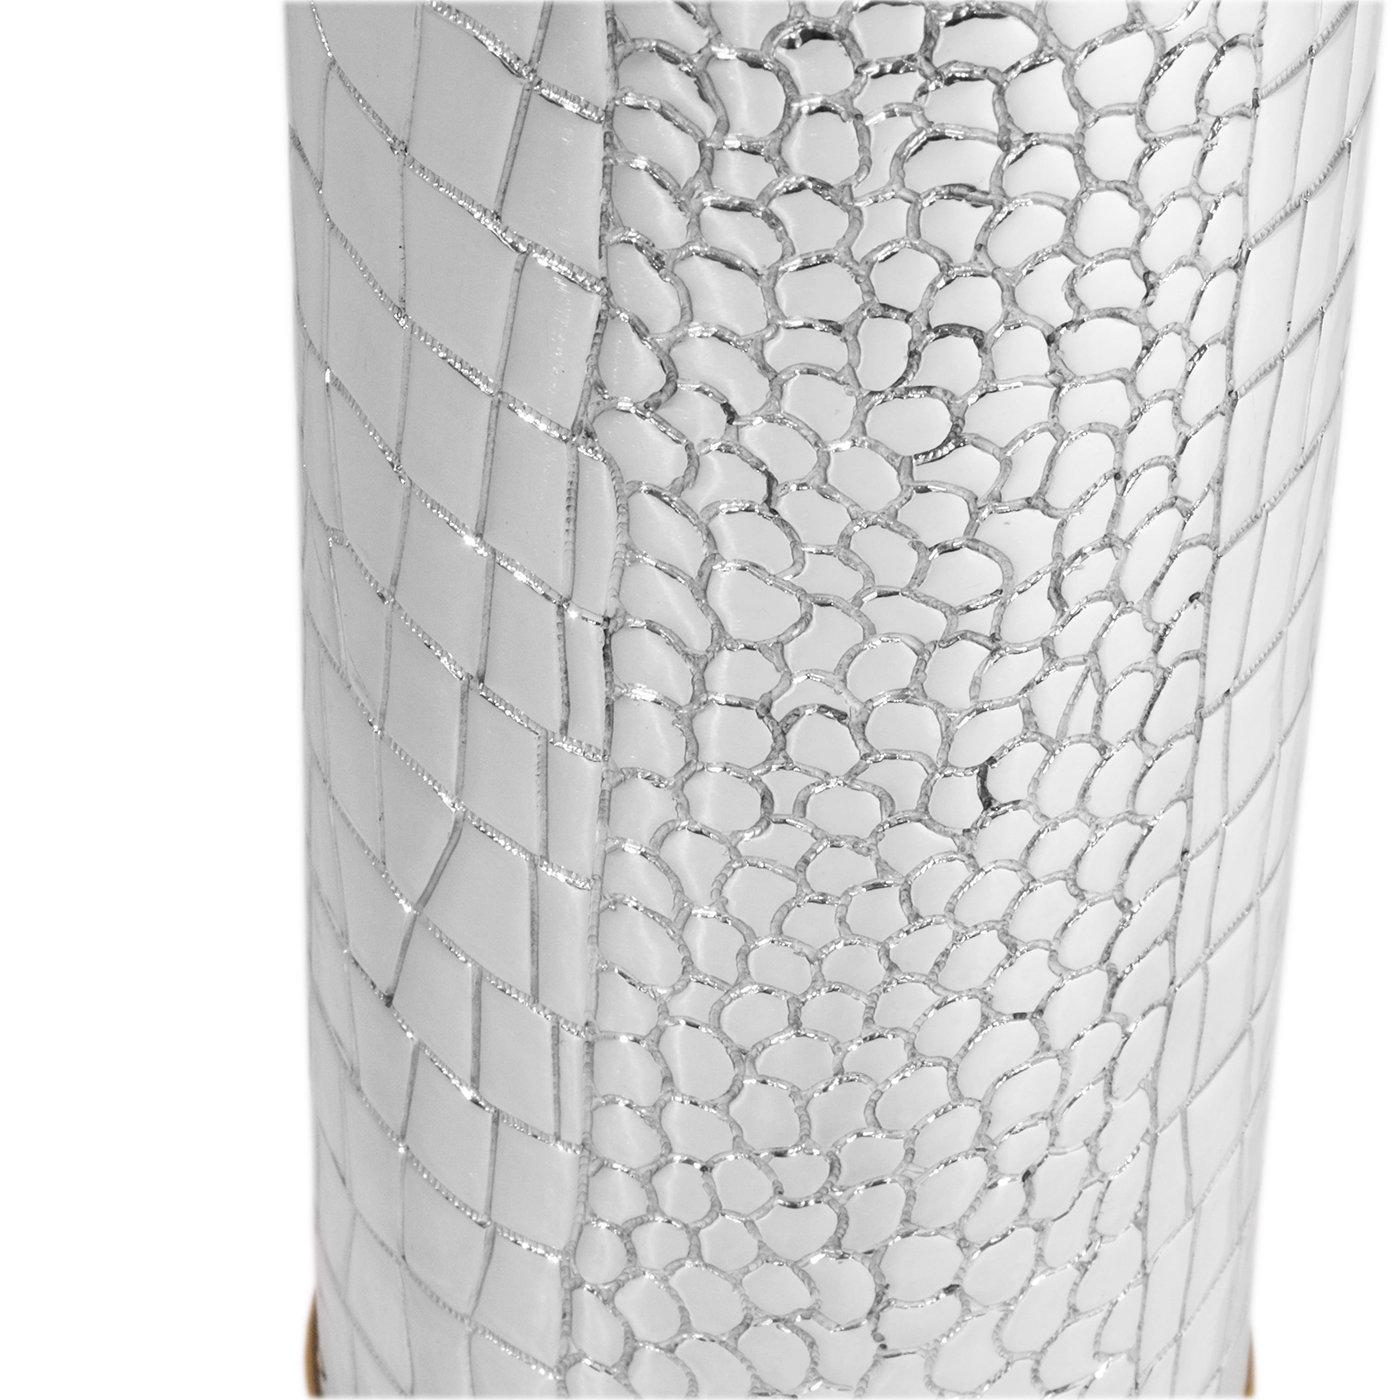 This sophisticated wine cover in pure silver 999/°°, with its crocodile leather-like texture minutely handcrafted by master goldsmith Marco Fedi, pays homage to the century-old leather industry in Tuscany. The production process for this piece took